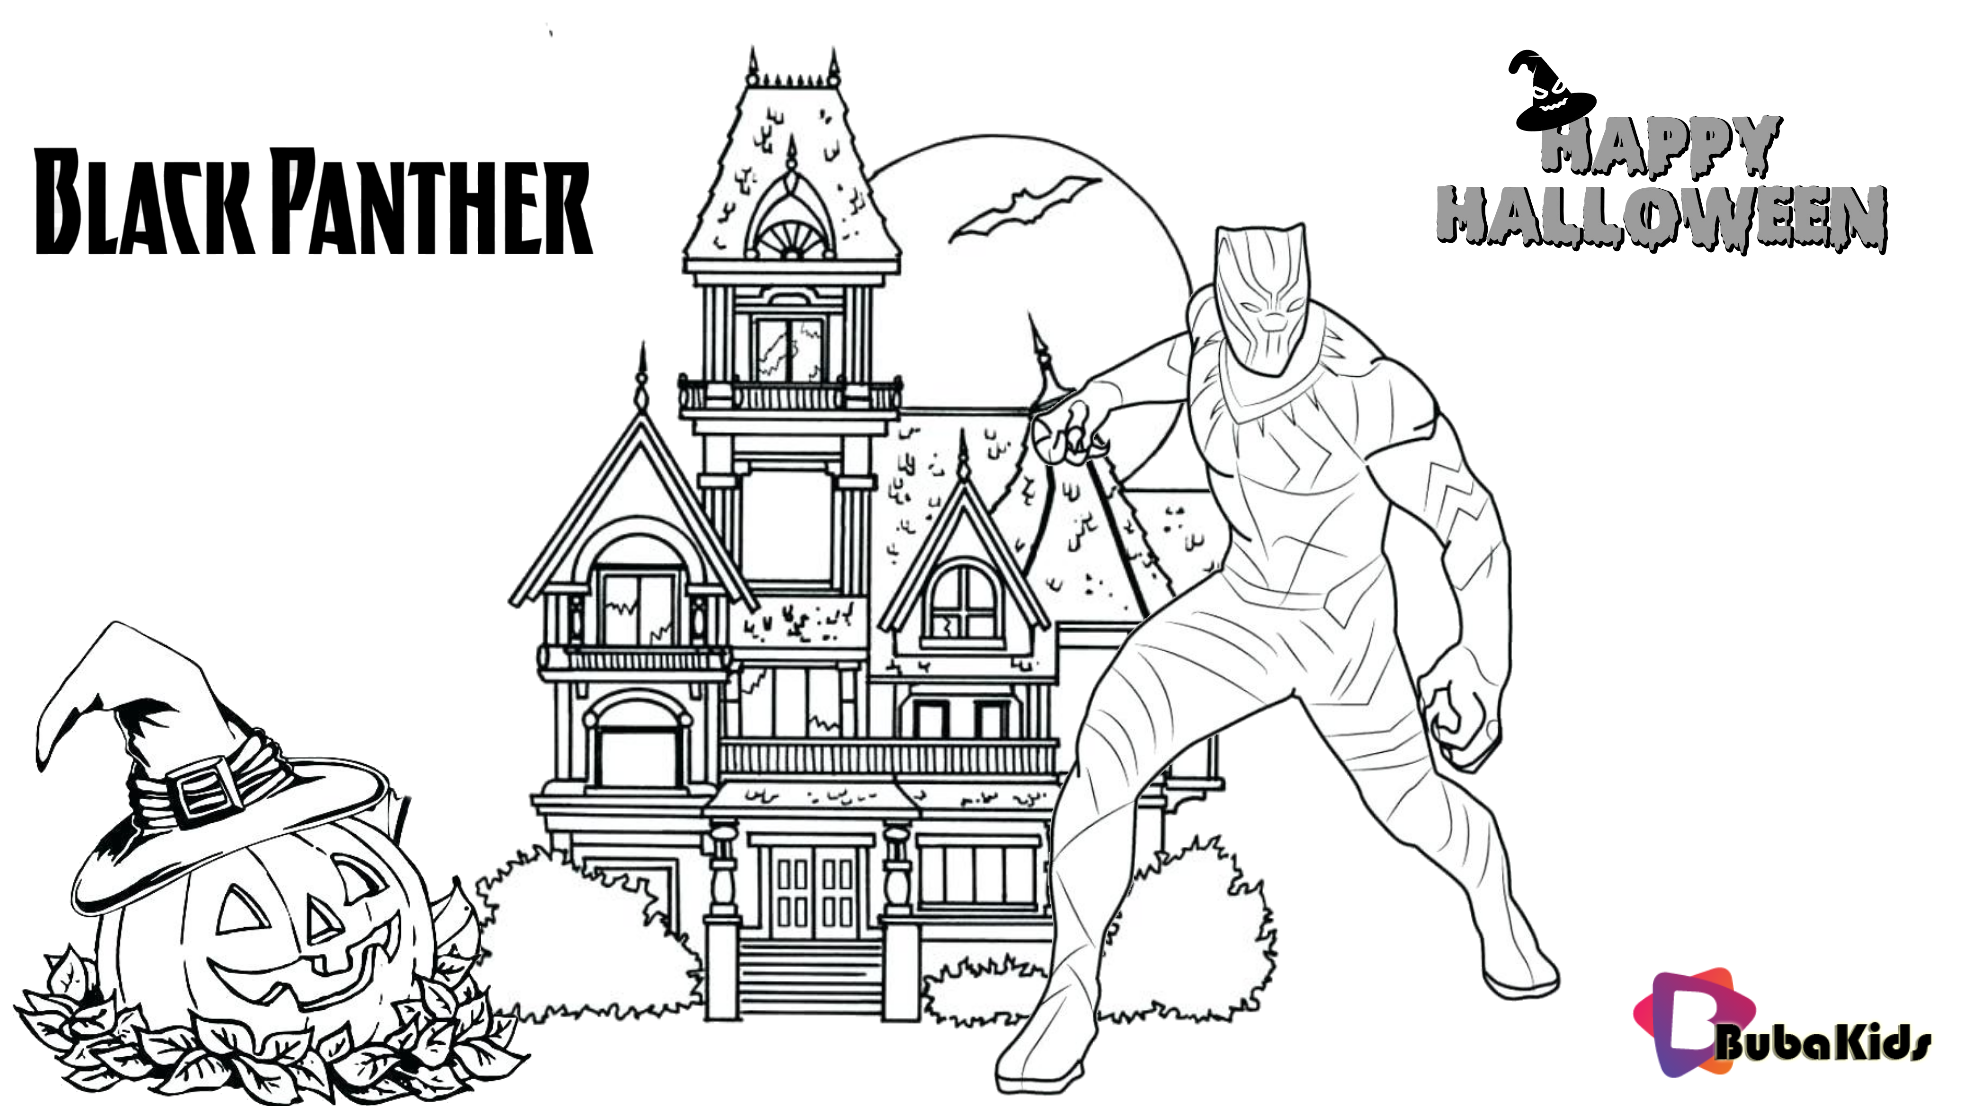 Black panther costume for 2019 halloween party coloring page Wallpaper